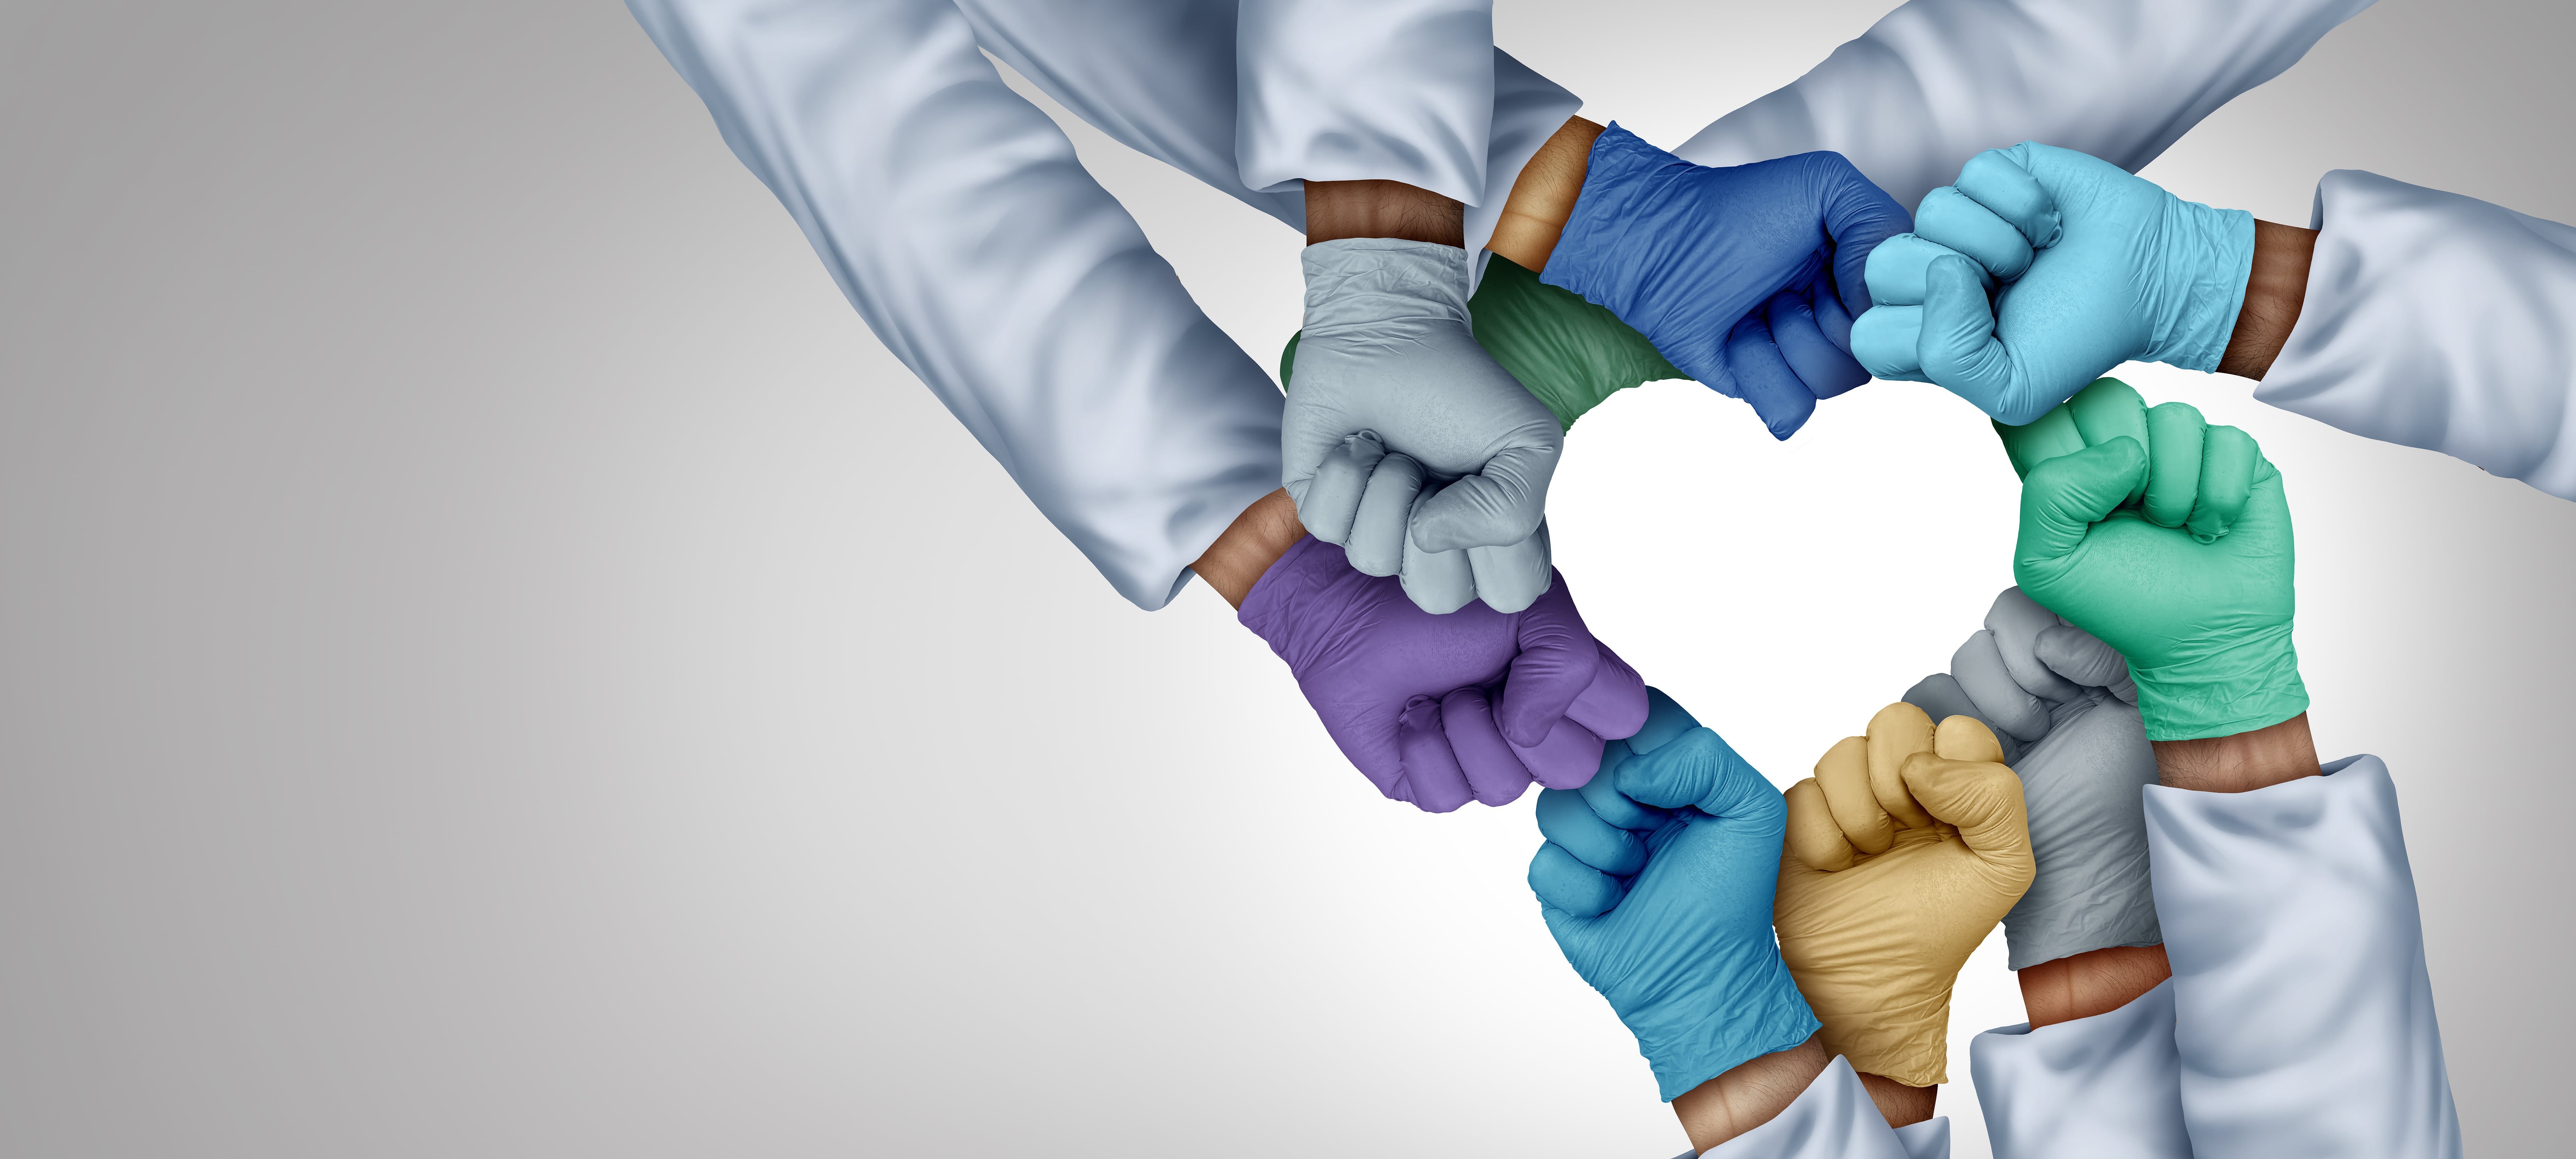 doctors wearing gloves forming a heart.